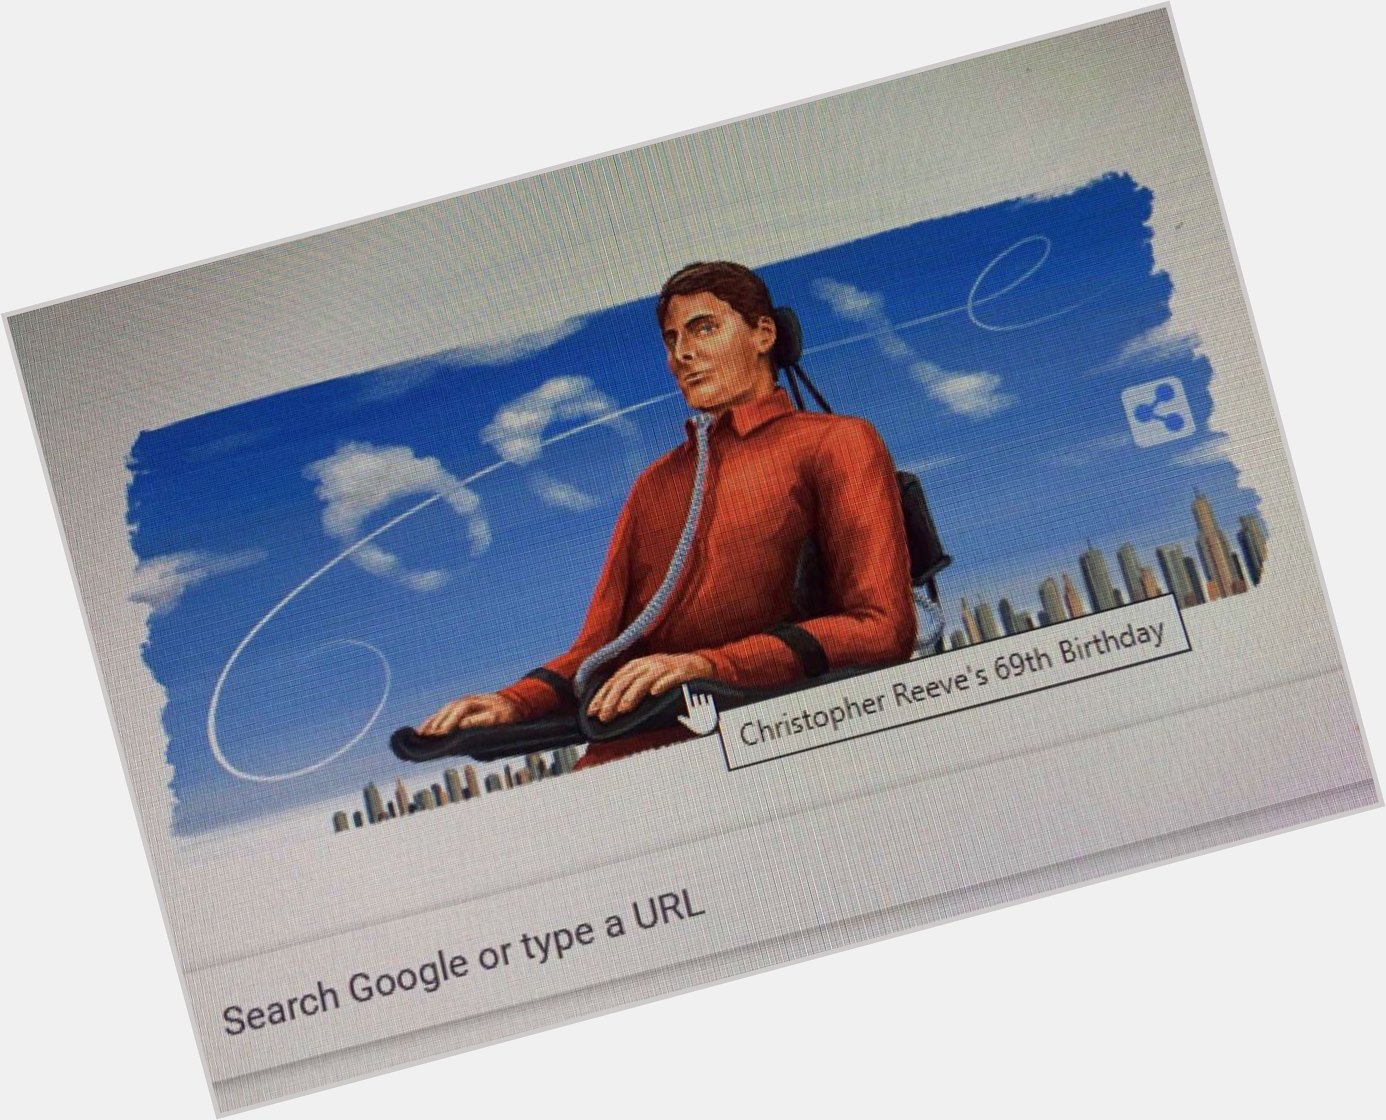 Google making me cry this morning. Happy Birthday to my hero Christopher Reeve 